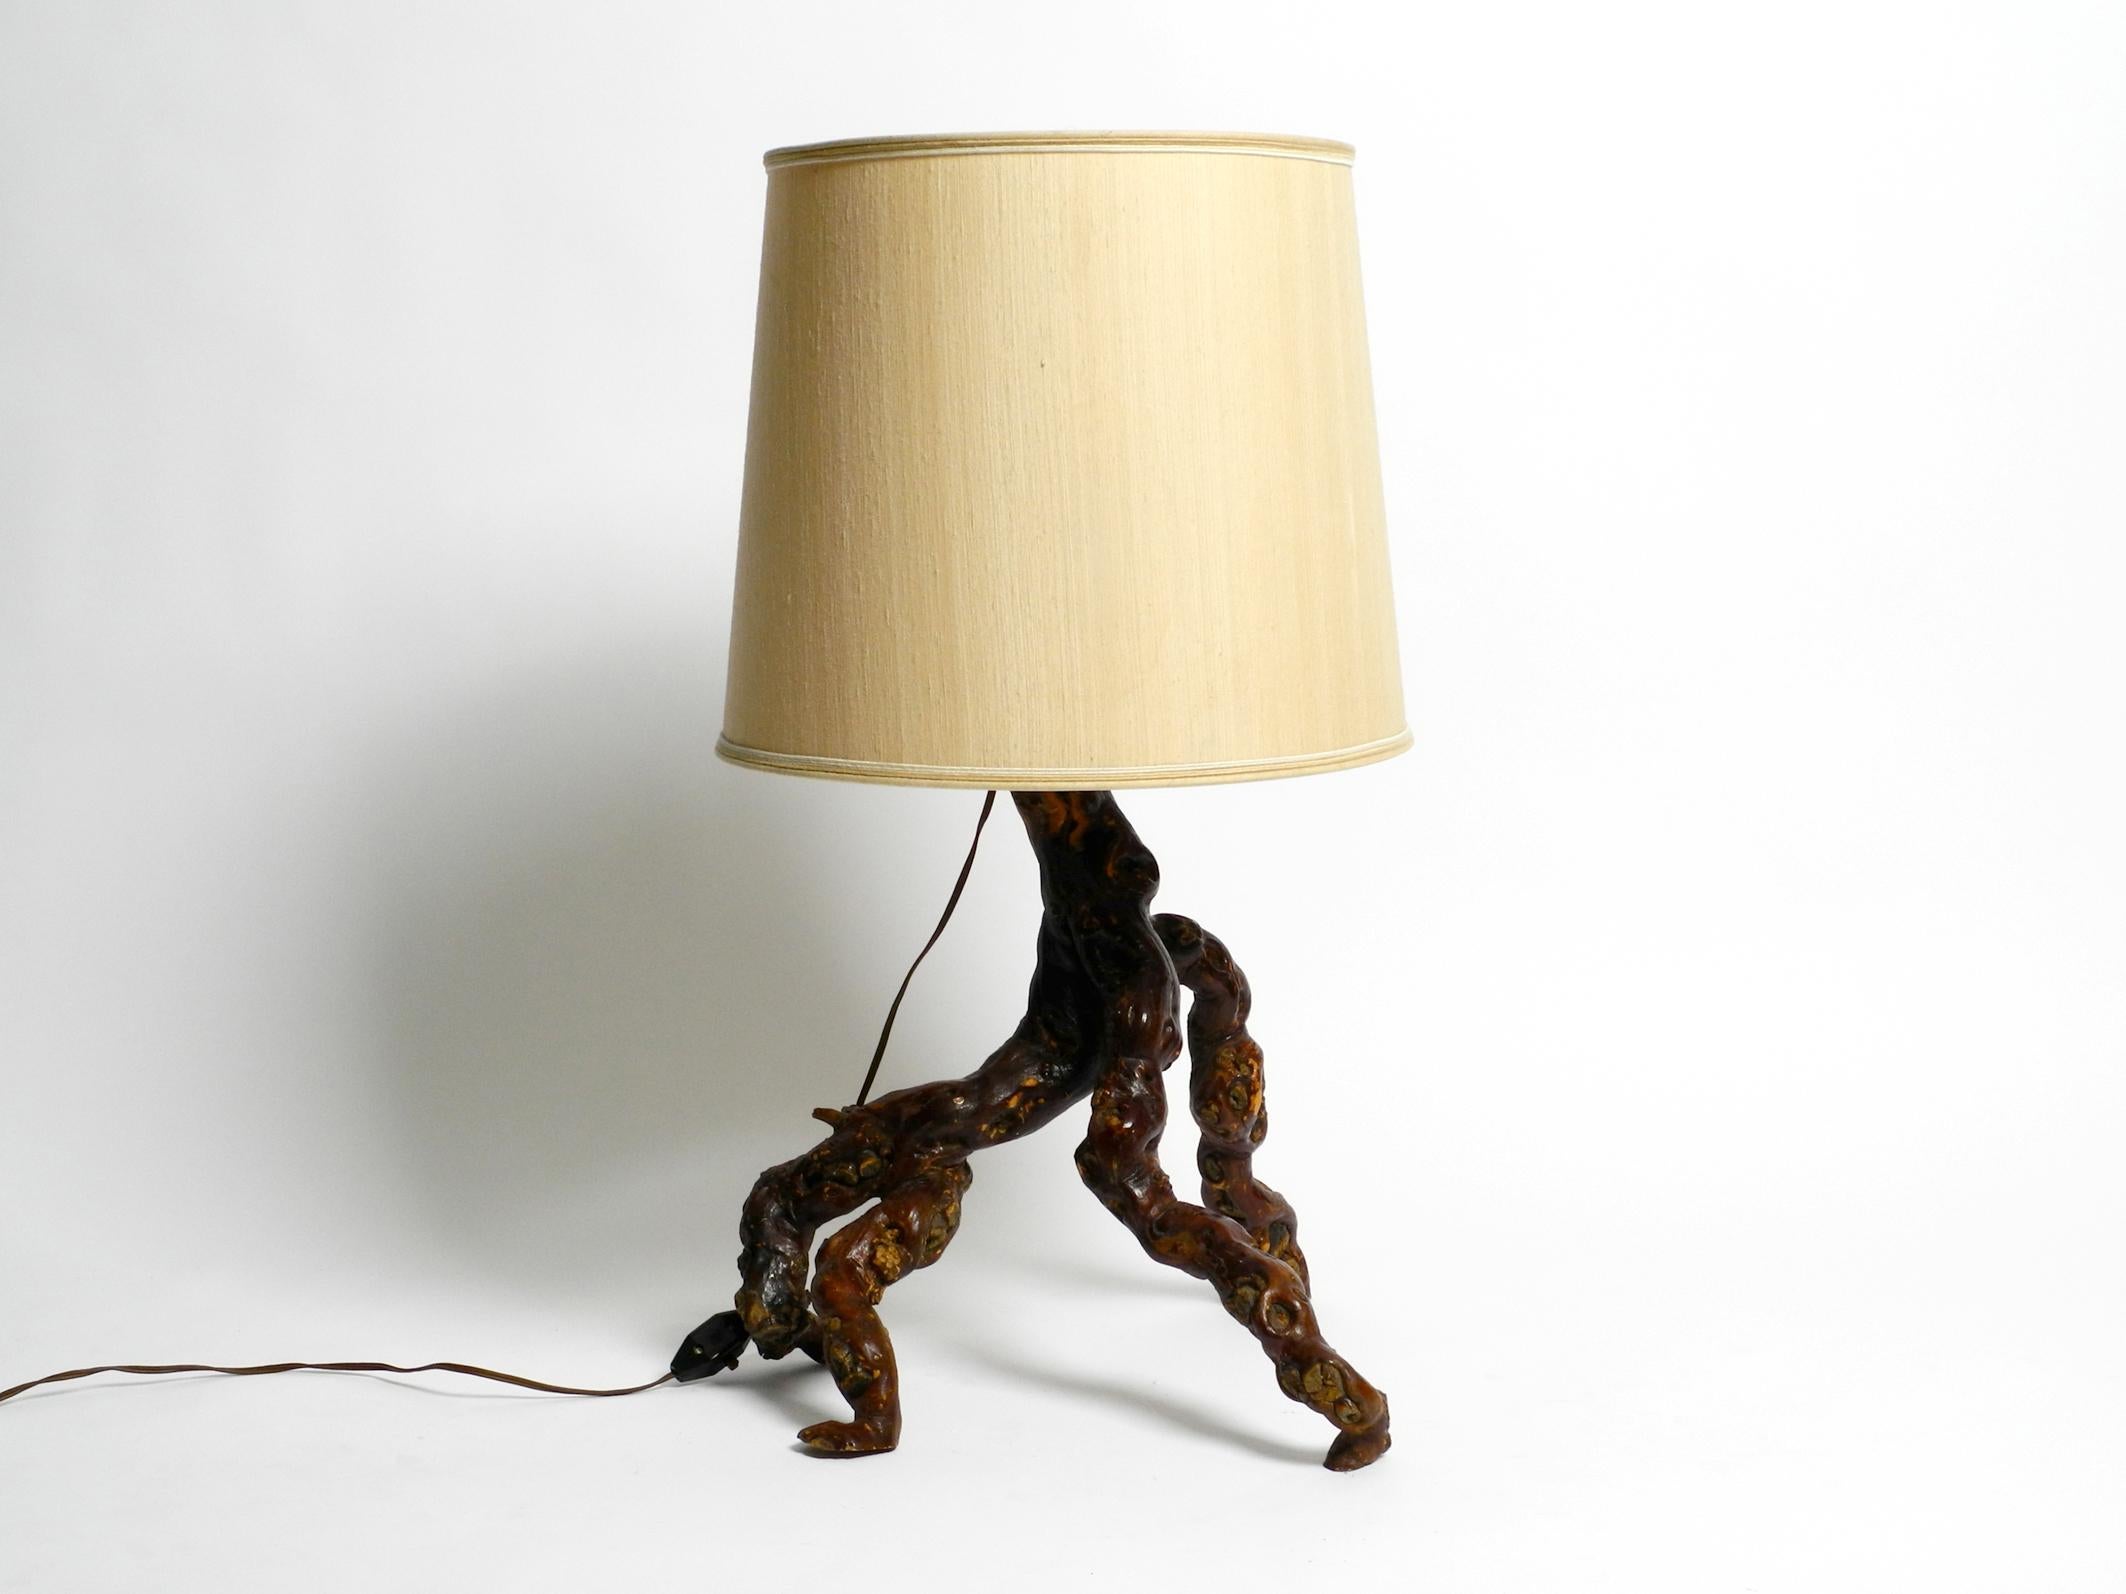 Beautiful large 1960's German root wood table lamp with a large silk shade
Typical mid-century design from Germany in very good vintage condition.
Complete lamp frame is made of a wooden root. Each lamp made of a root wood is unique.
100%